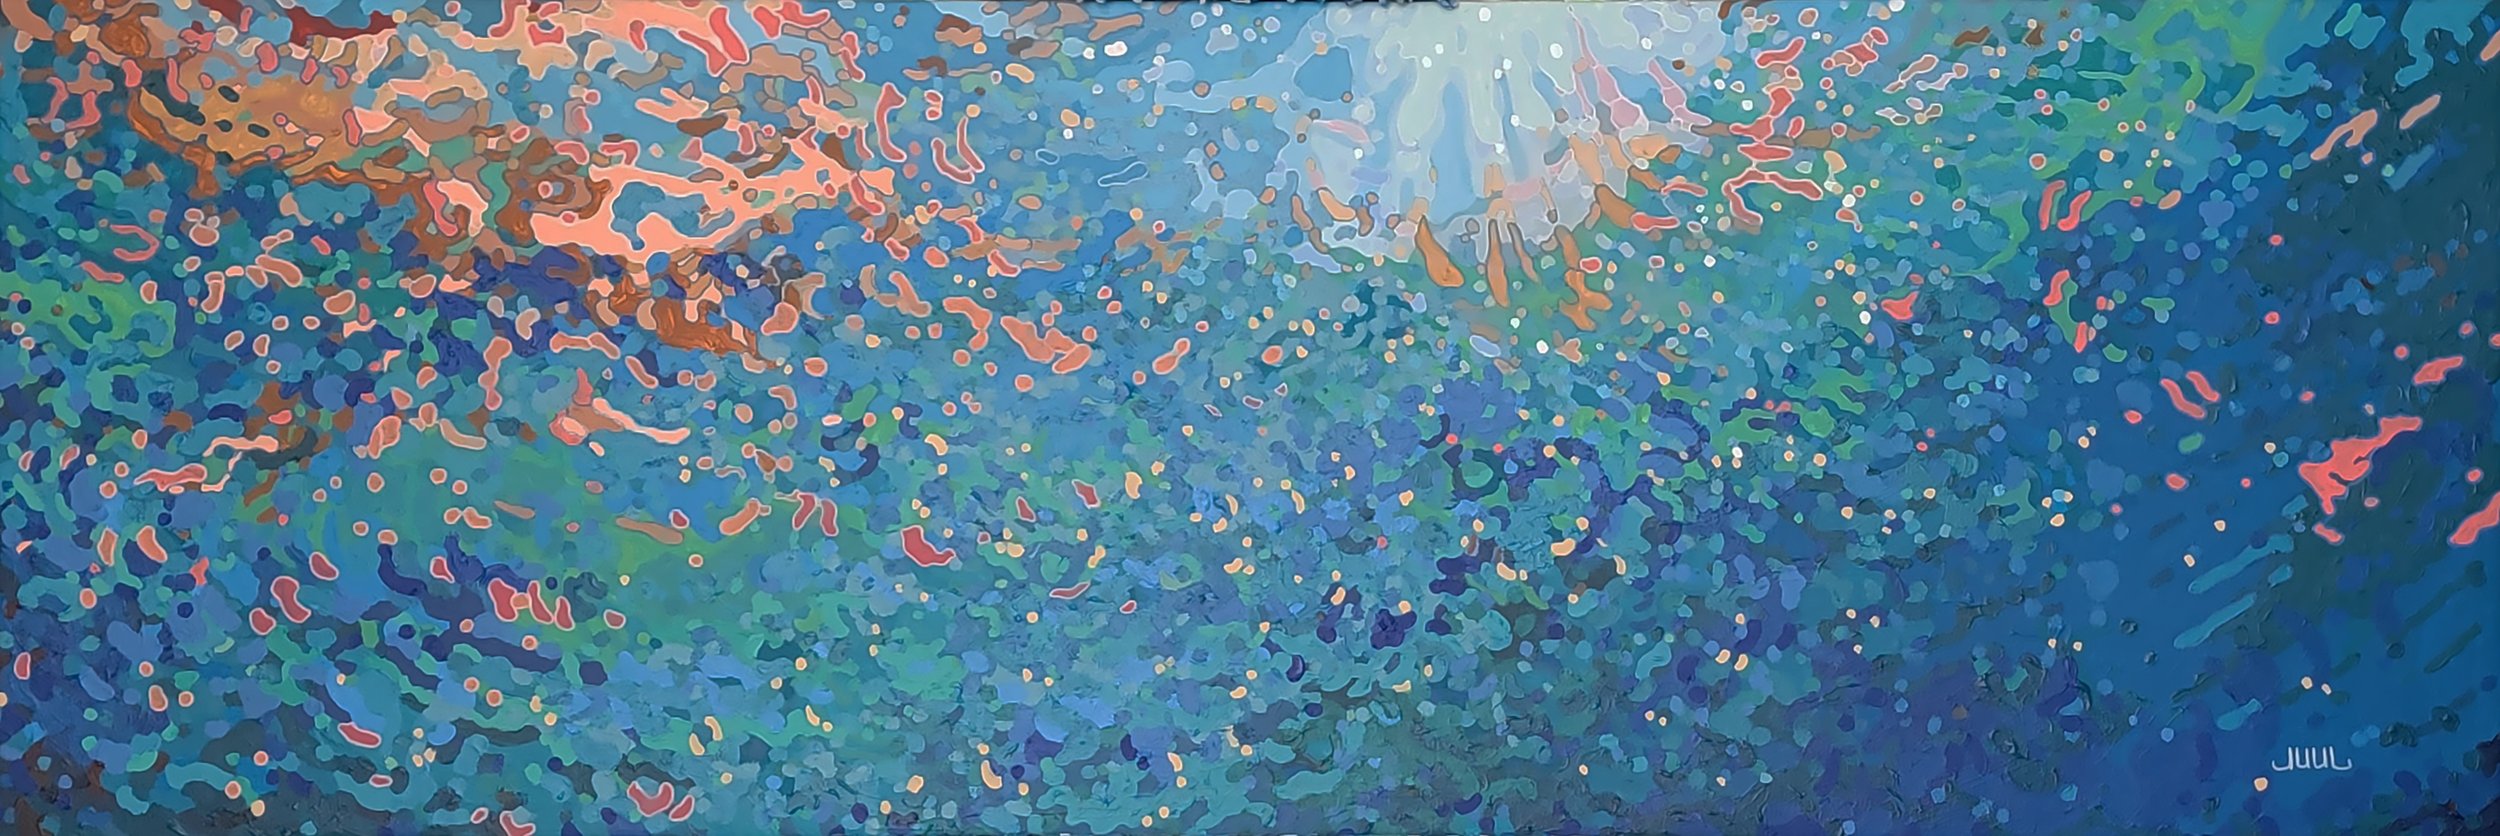 MARGARET JUUL - Ever Changing - Acrylic on Canvas - 22 x 66 inches